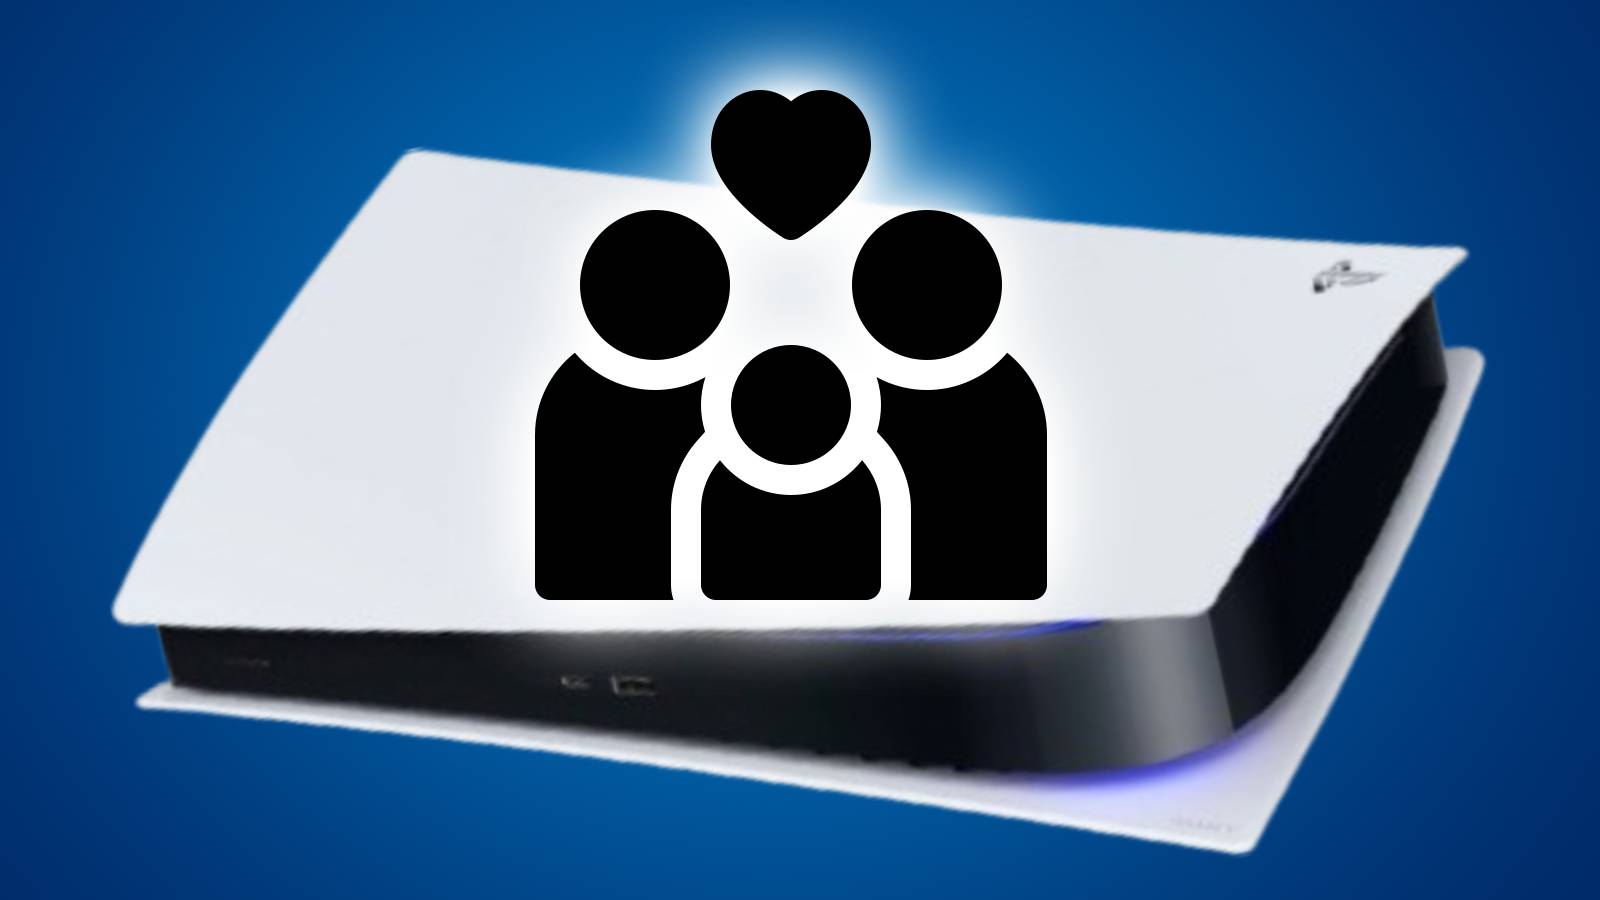 Image of a PS5, with an icon of a family by Freepix on the top, with a blue background.